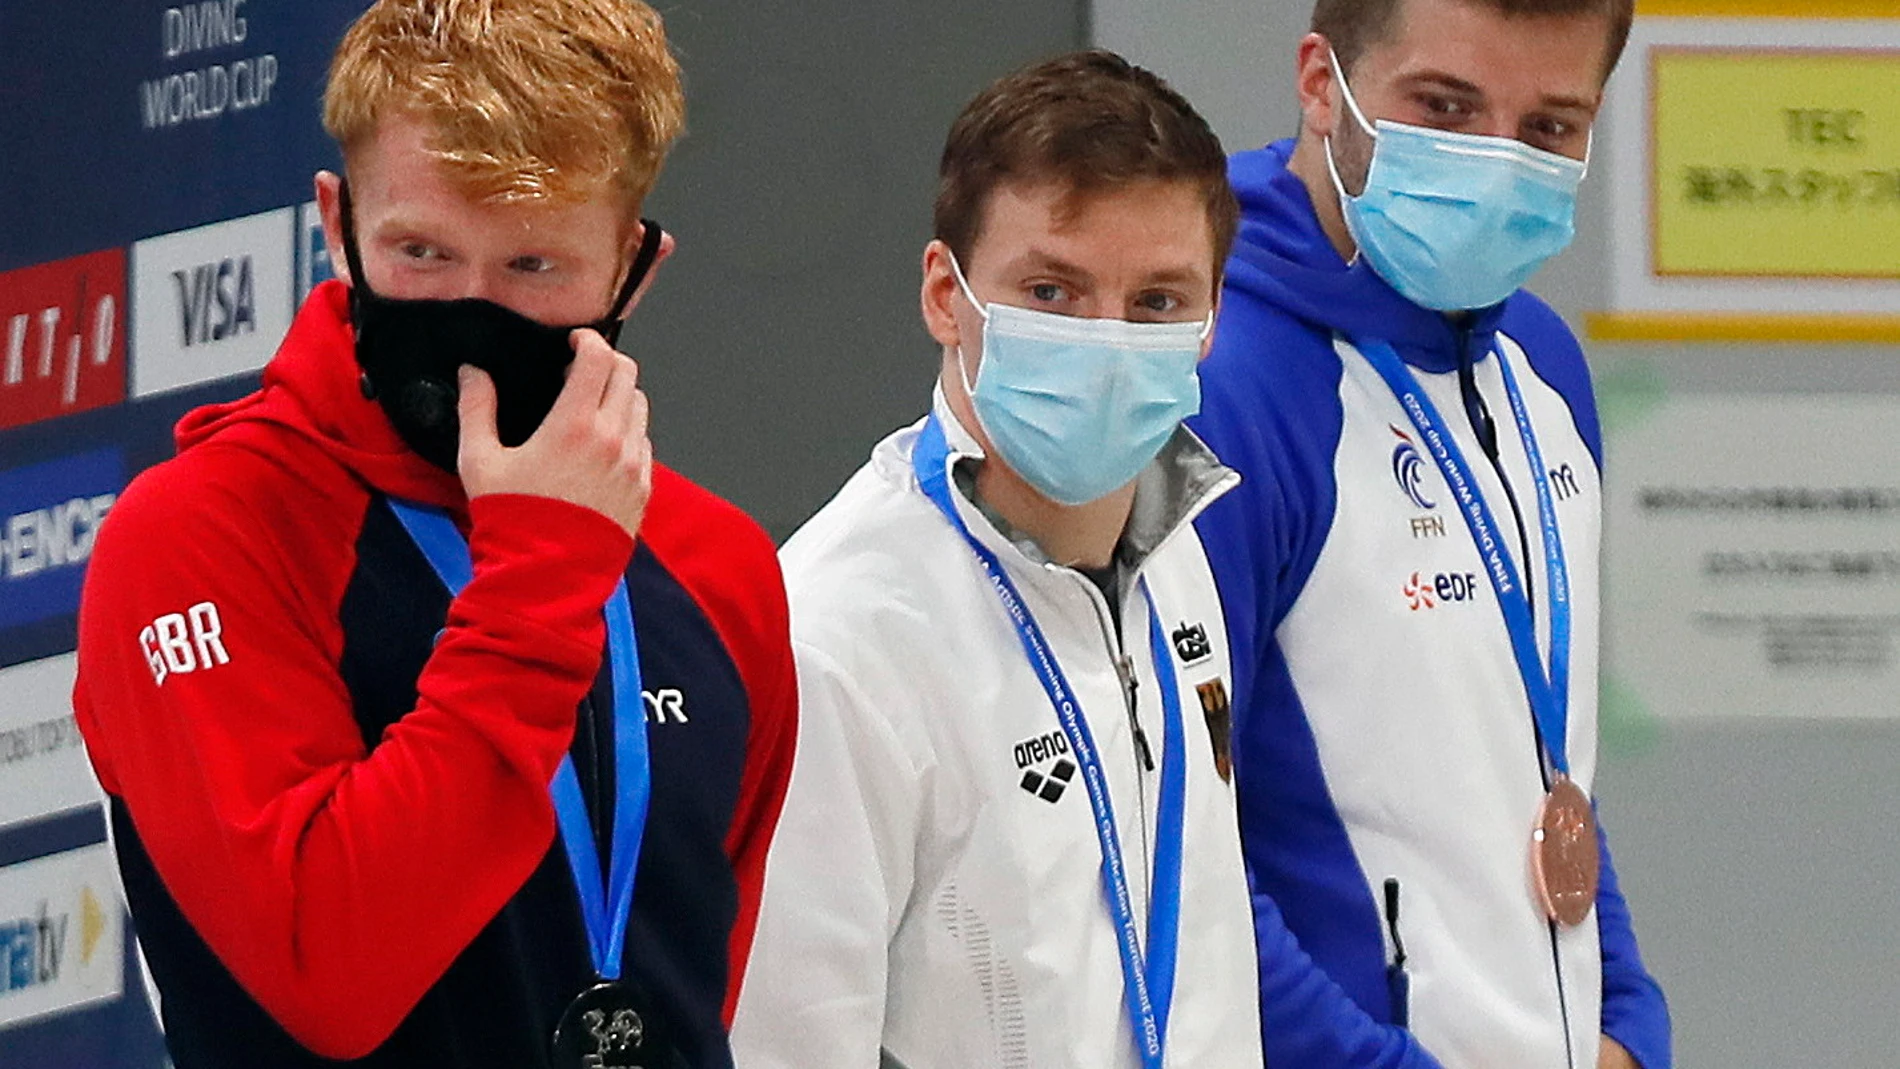 Tokyo (Japan), 06/05/2021.- Martin Wolfram (C) of Germany is flanked by silver medalist James Heatly (L) of Britain and bronze medalist Alexis Jandard (R) of France on podium after winning the men's 3m springboard final of the FINA Diving World Cup 2021 at Tokyo Aquatics Center in Tokyo, Japan, 06 May 2021. (Francia, Alemania, Japón, Reino Unido, Tokio) EFE/EPA/KIMIMASA MAYAMA